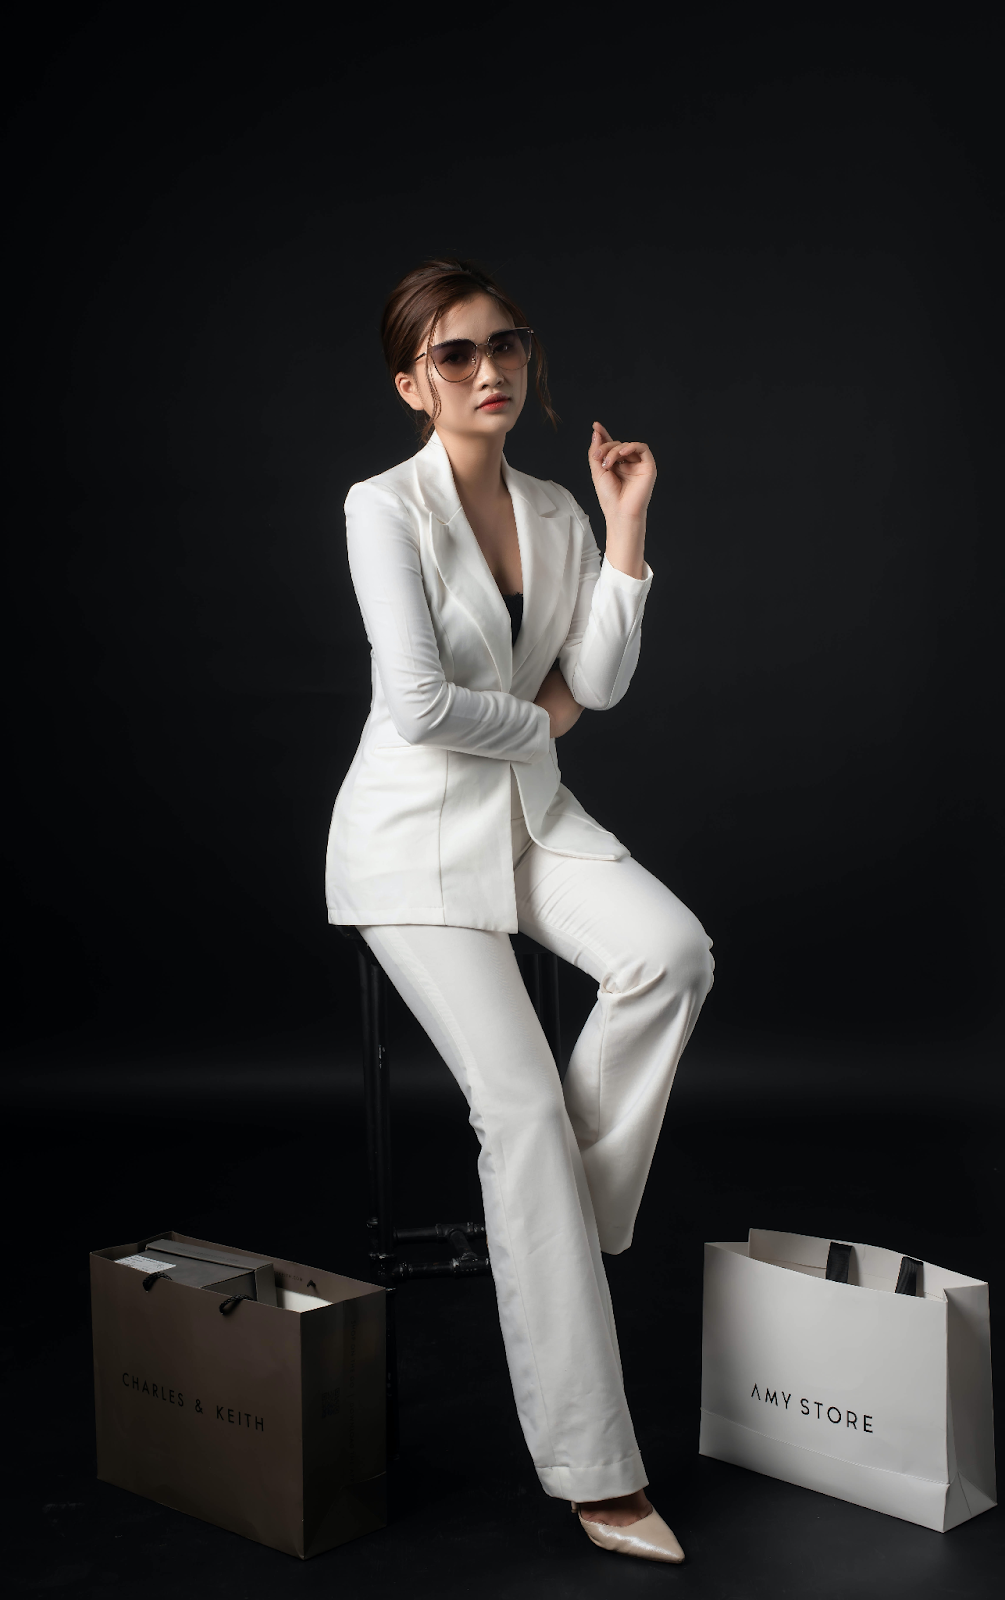 Girl posing in a white suit